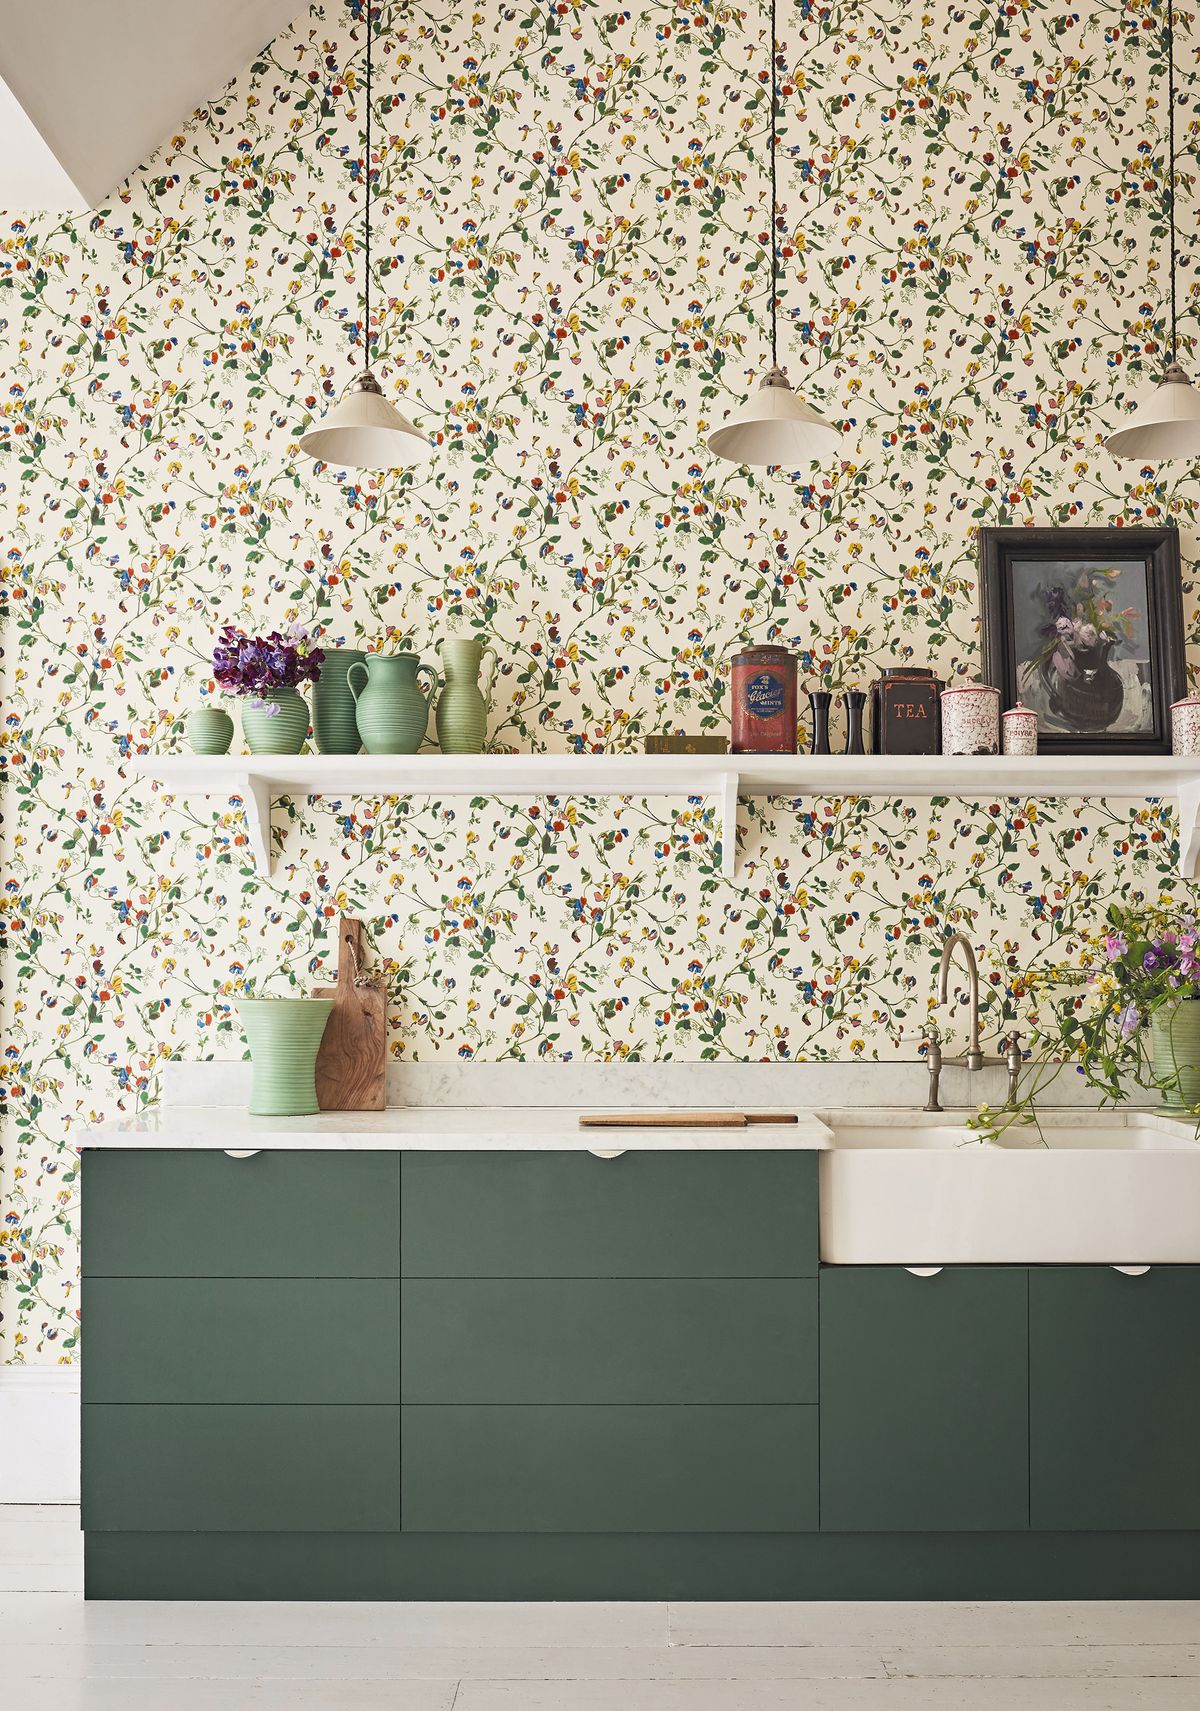 Kitchen wallpaper ideas: 16 beautiful designs to update your space